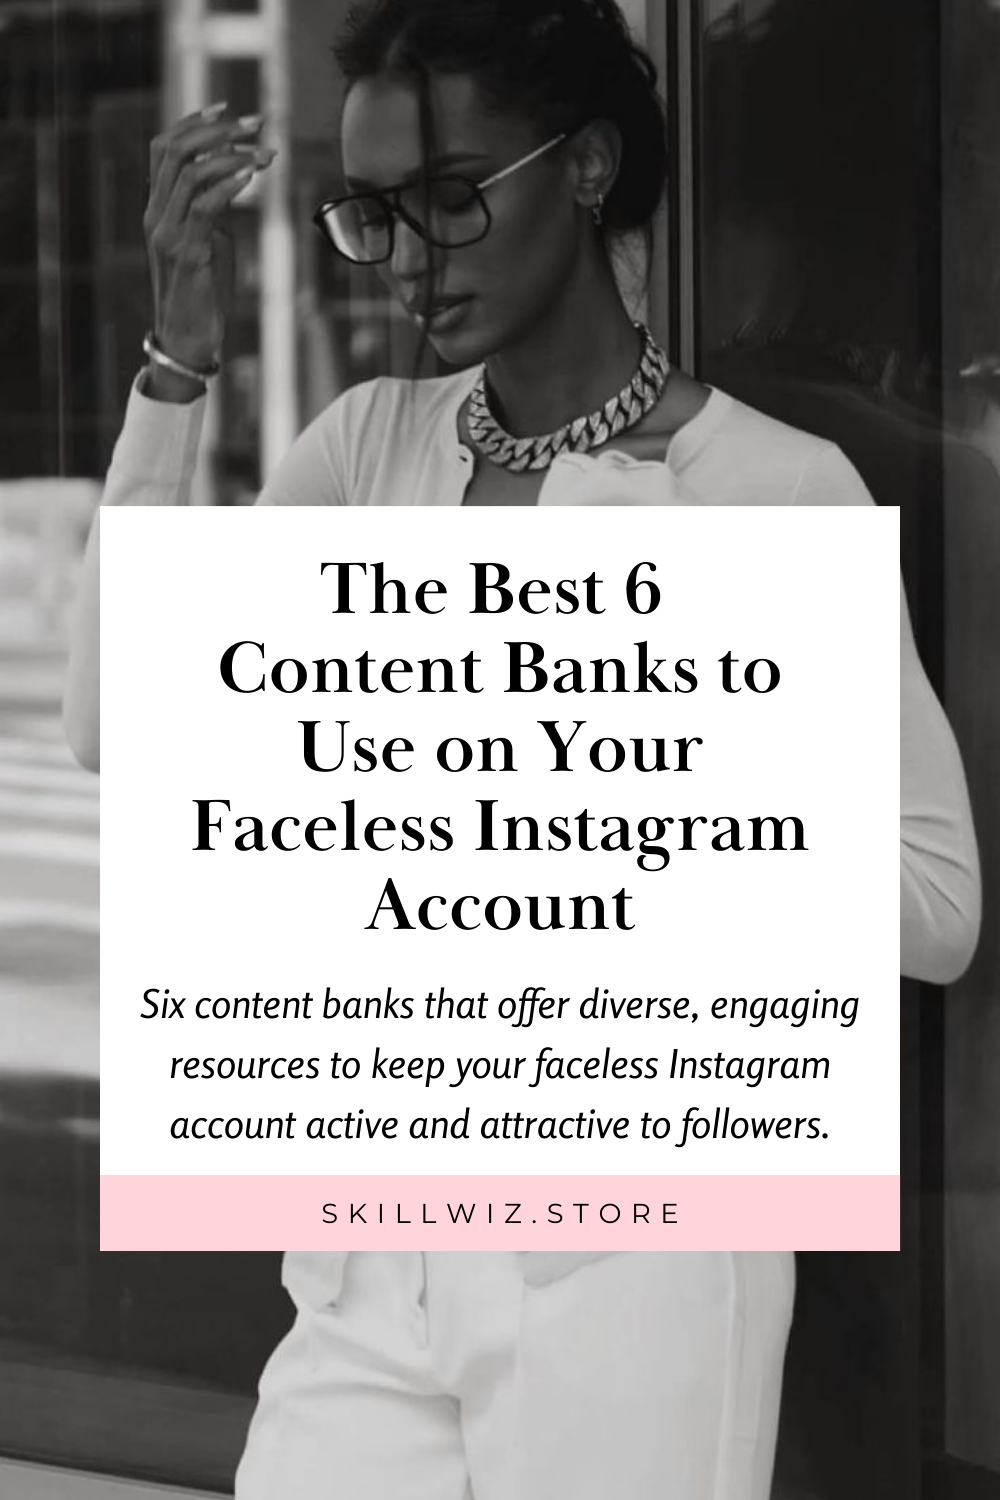 The Best 6 Content Banks to Fuel Your Faceless Instagram Account